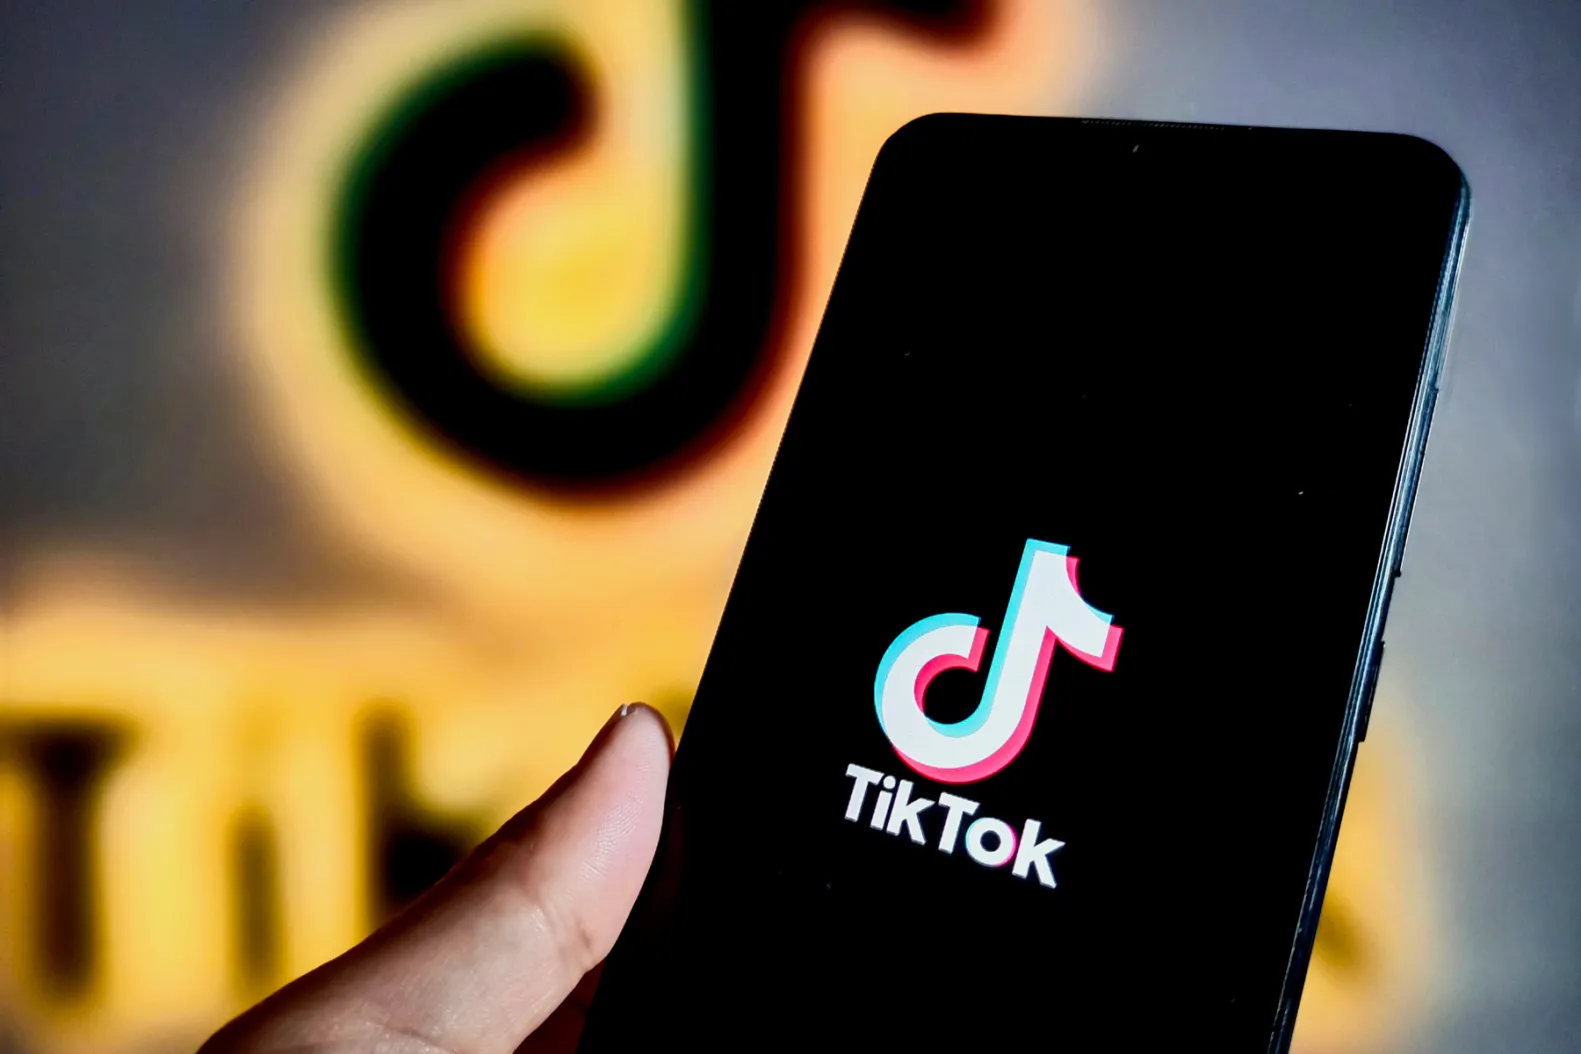 Could TikTok Be Banned Latest Update on U.S. Congress’s Decision and What It Means for Users